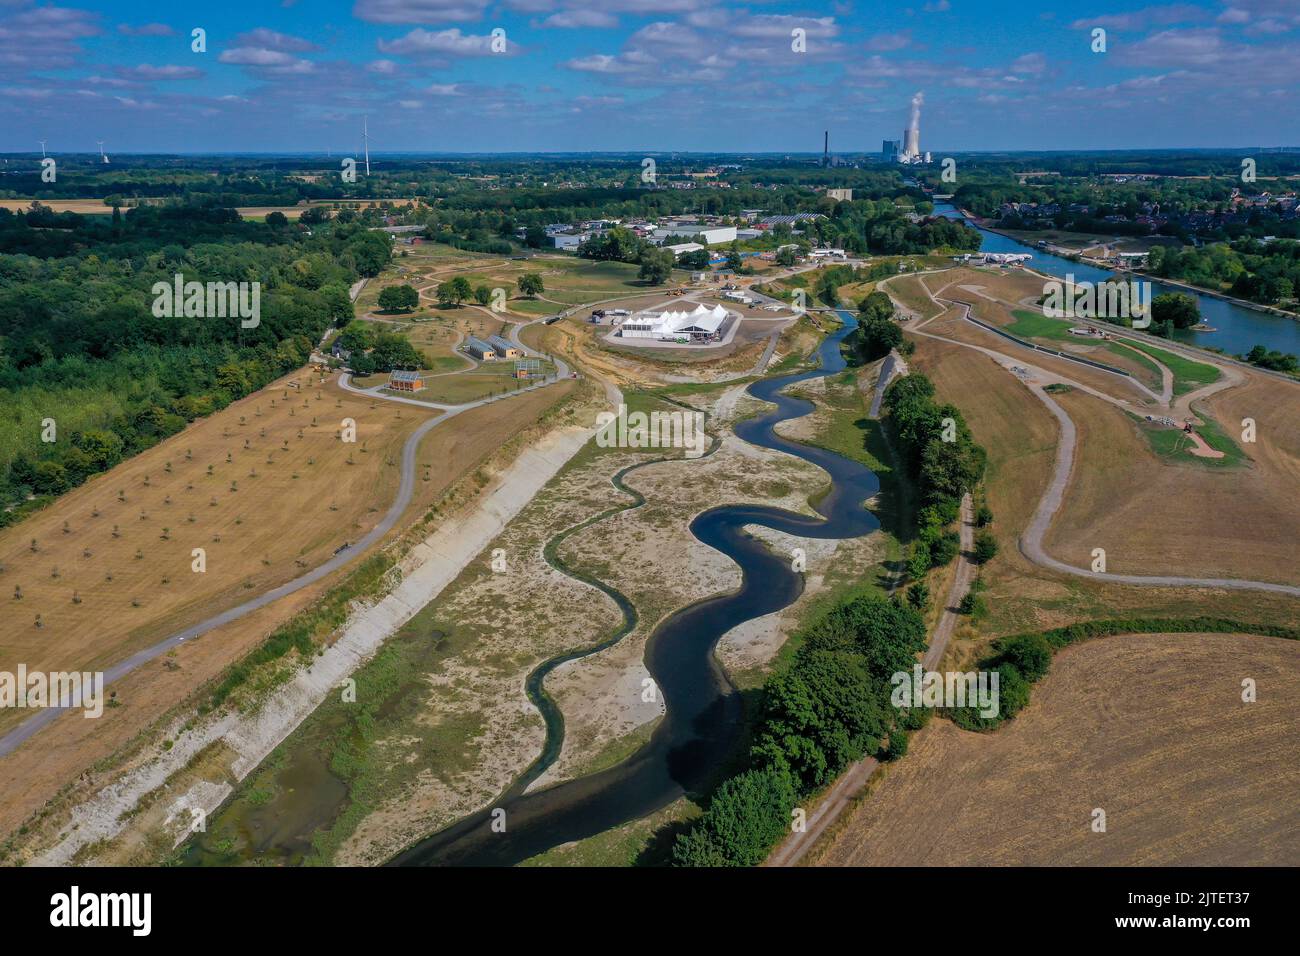 Recklinghausen, Castrop-Rauxel, North Rhine-Westphalia, Germany - EMSCHERLAND construction project, a 37-hectare water and nature experience park at t Stock Photo